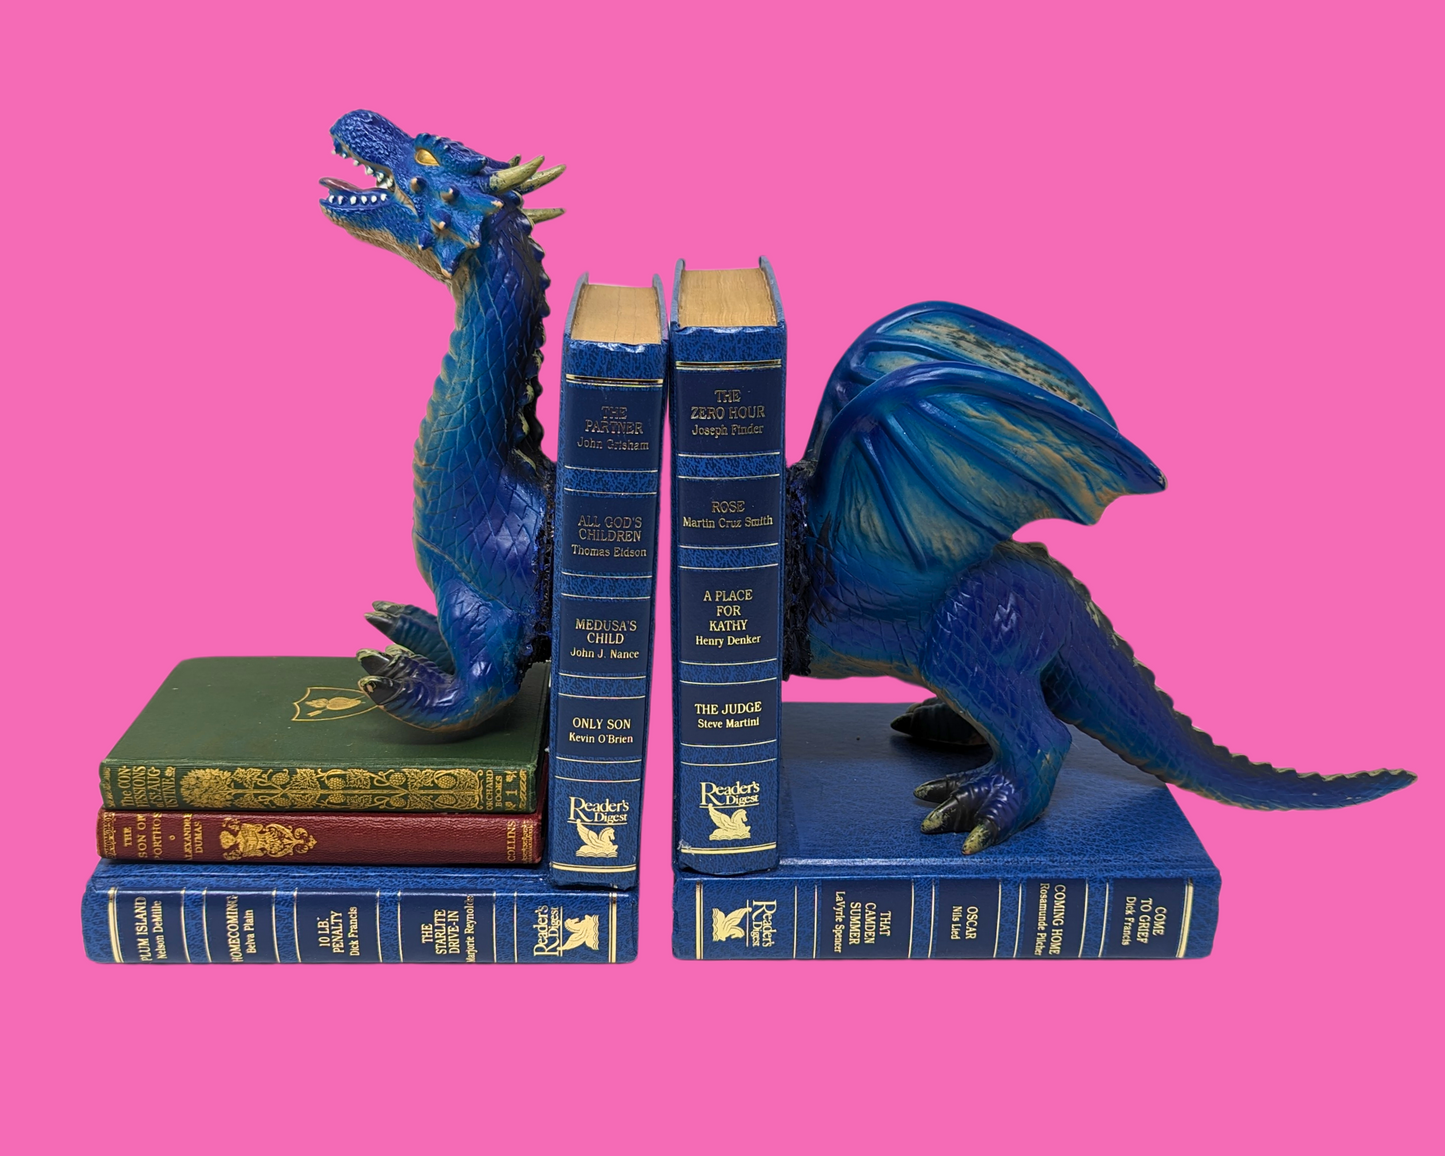 Handmade and Upcycled Two Headed Dragon Bookends